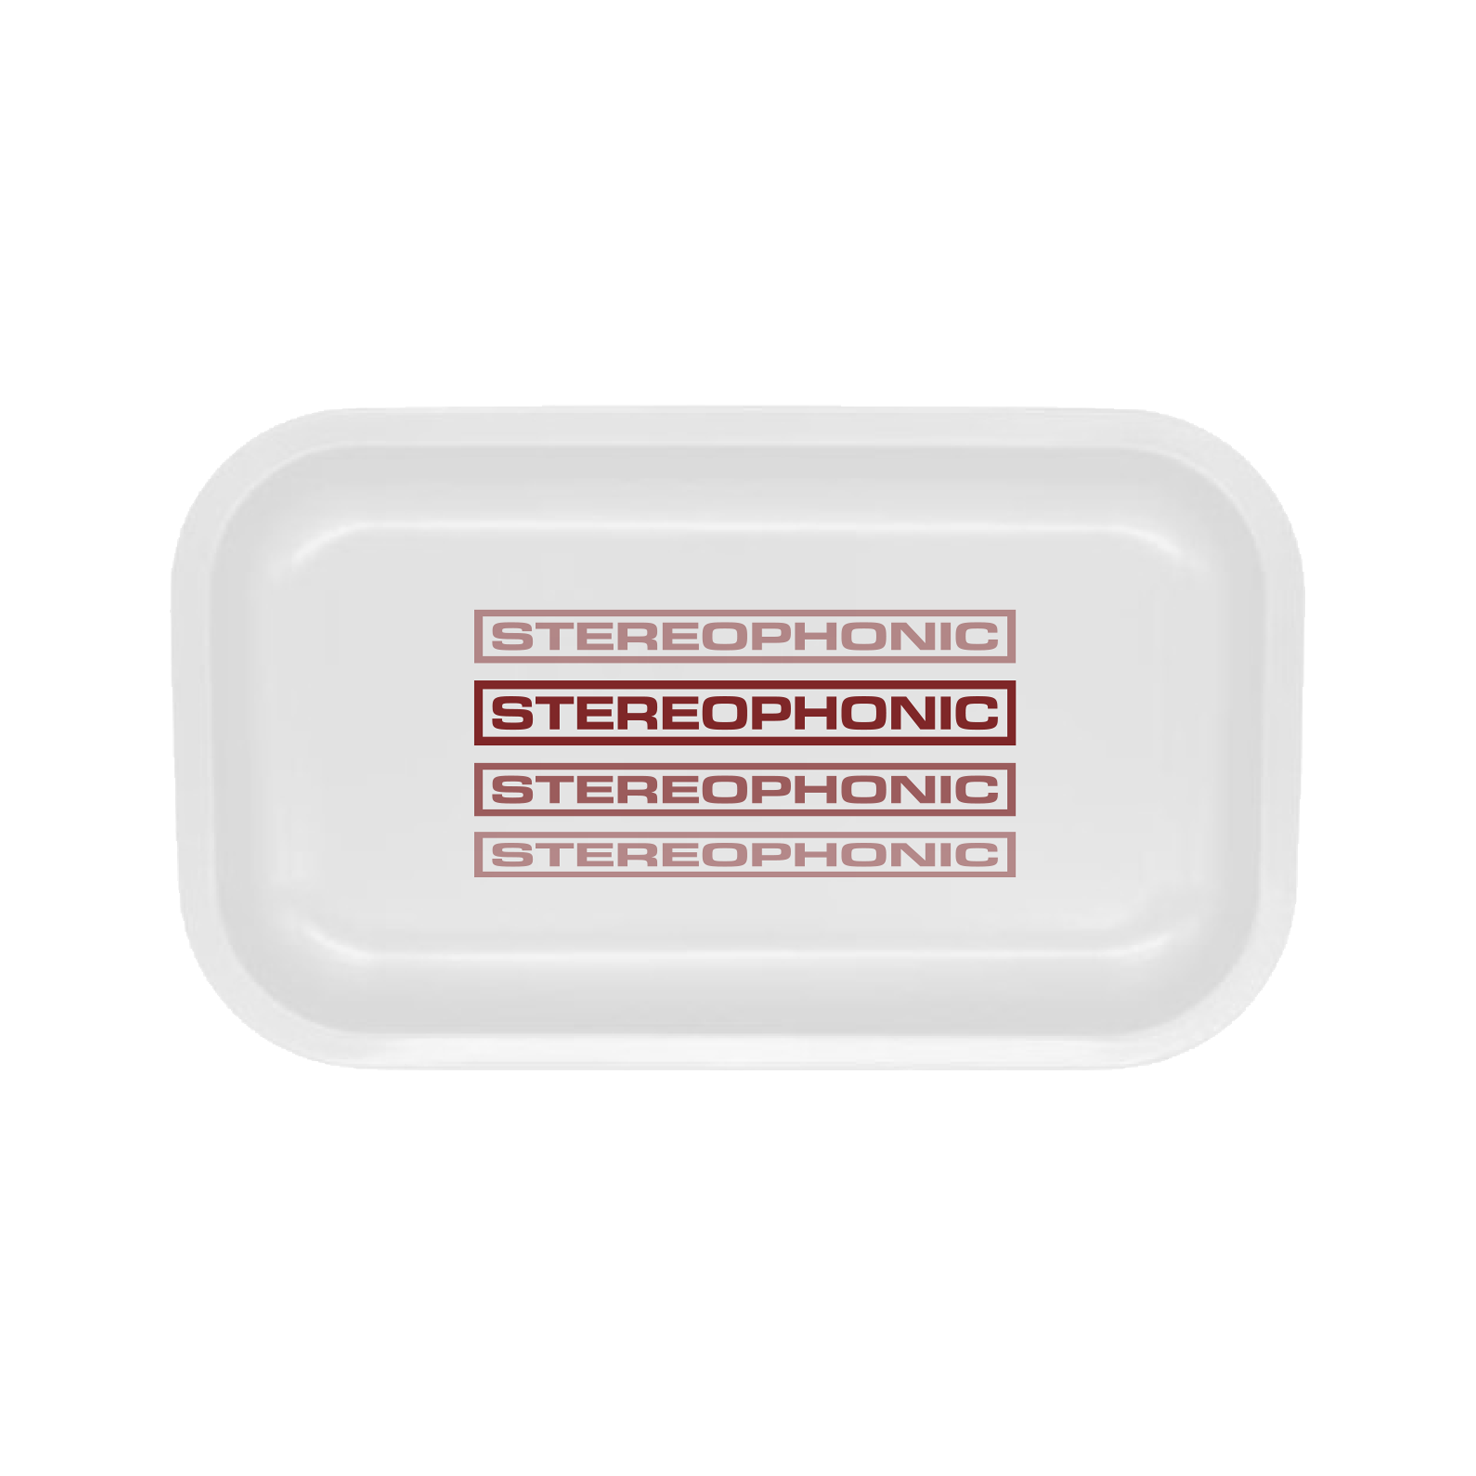 STEREOPHONIC Trinket Tray Image